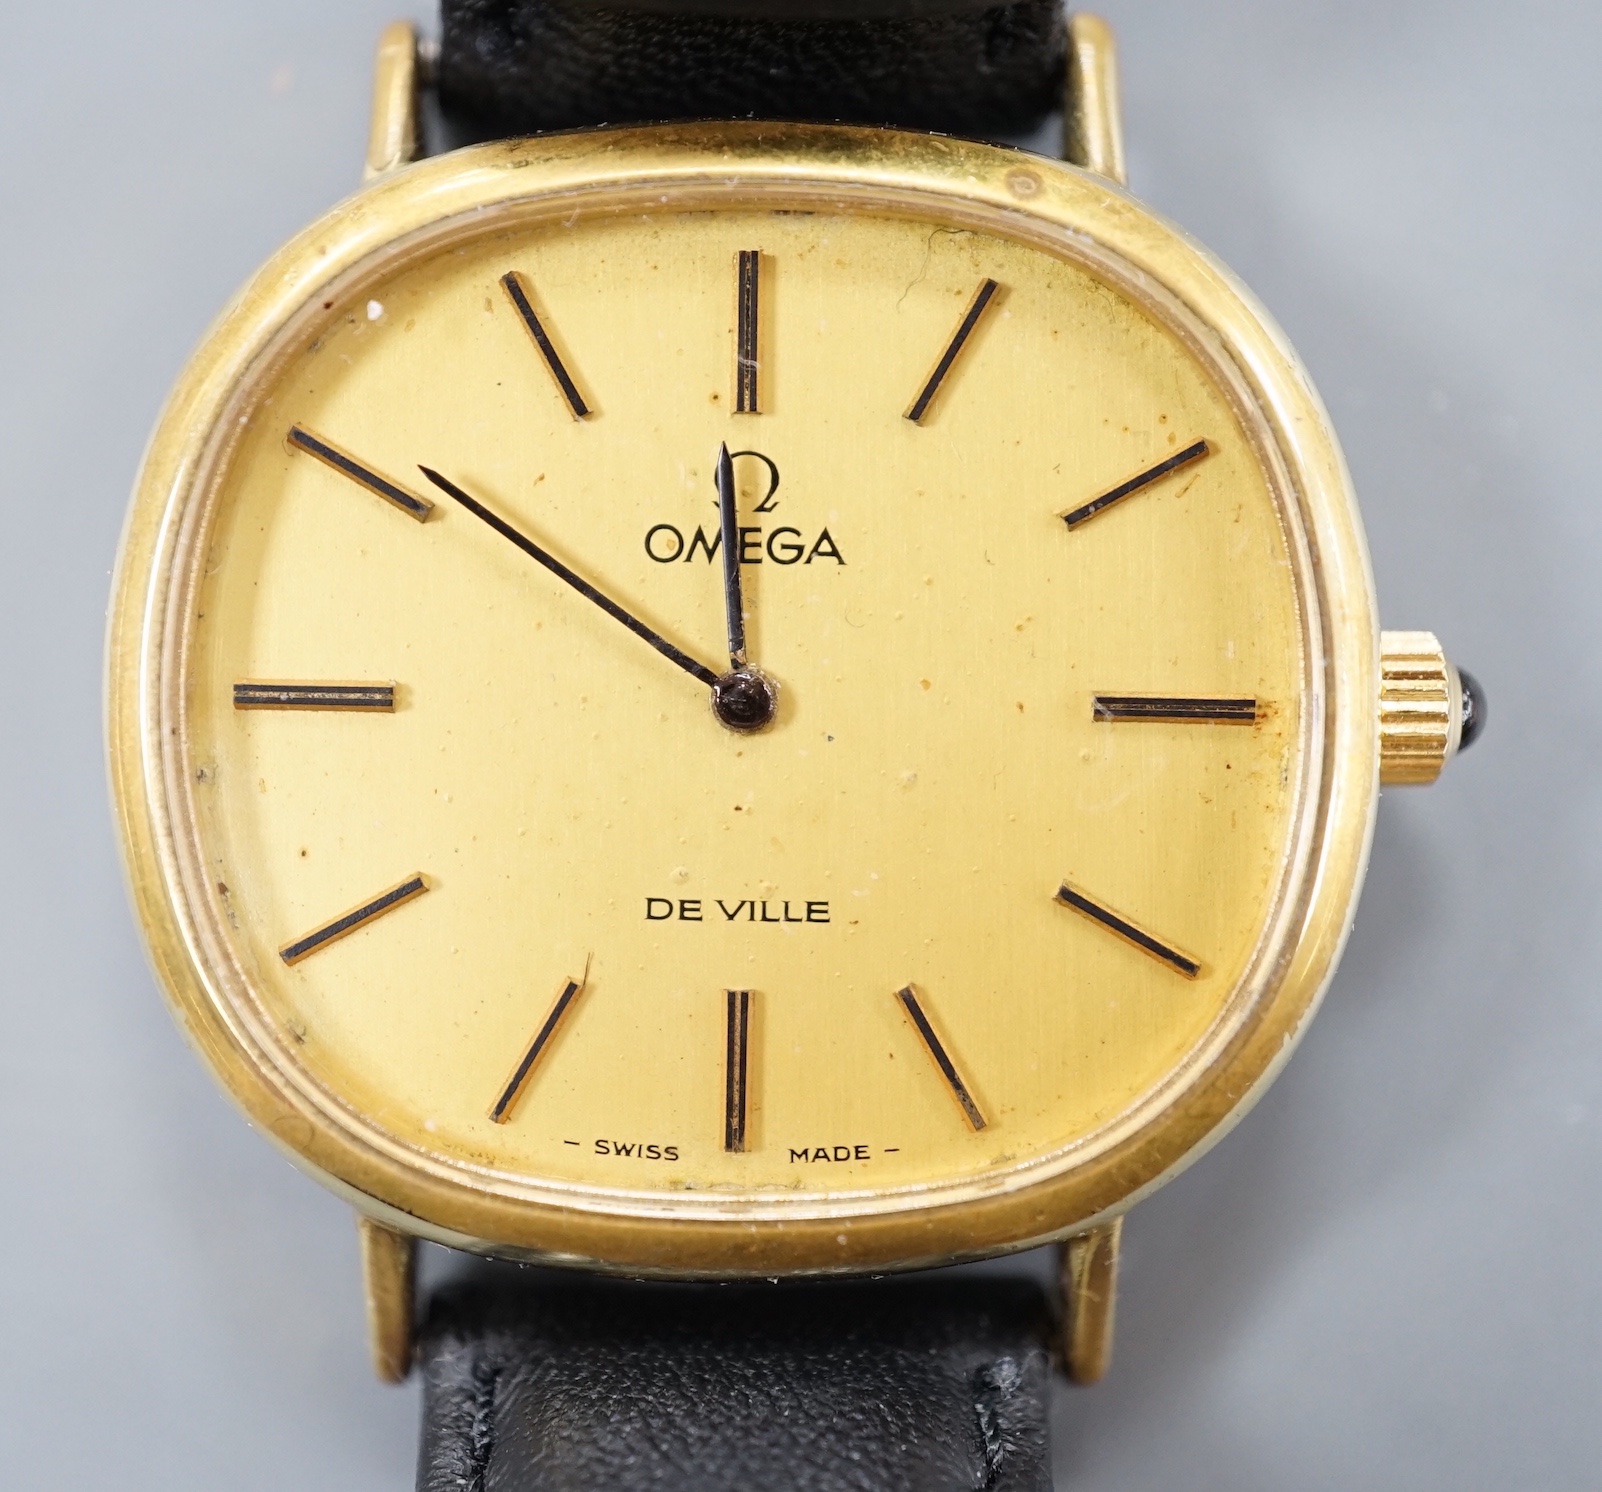 A gentleman's gold plated Omega de Ville manual wind wrist watch, on a black leather strap, with Omega buckle, case diameter 33mm, no box or papers.